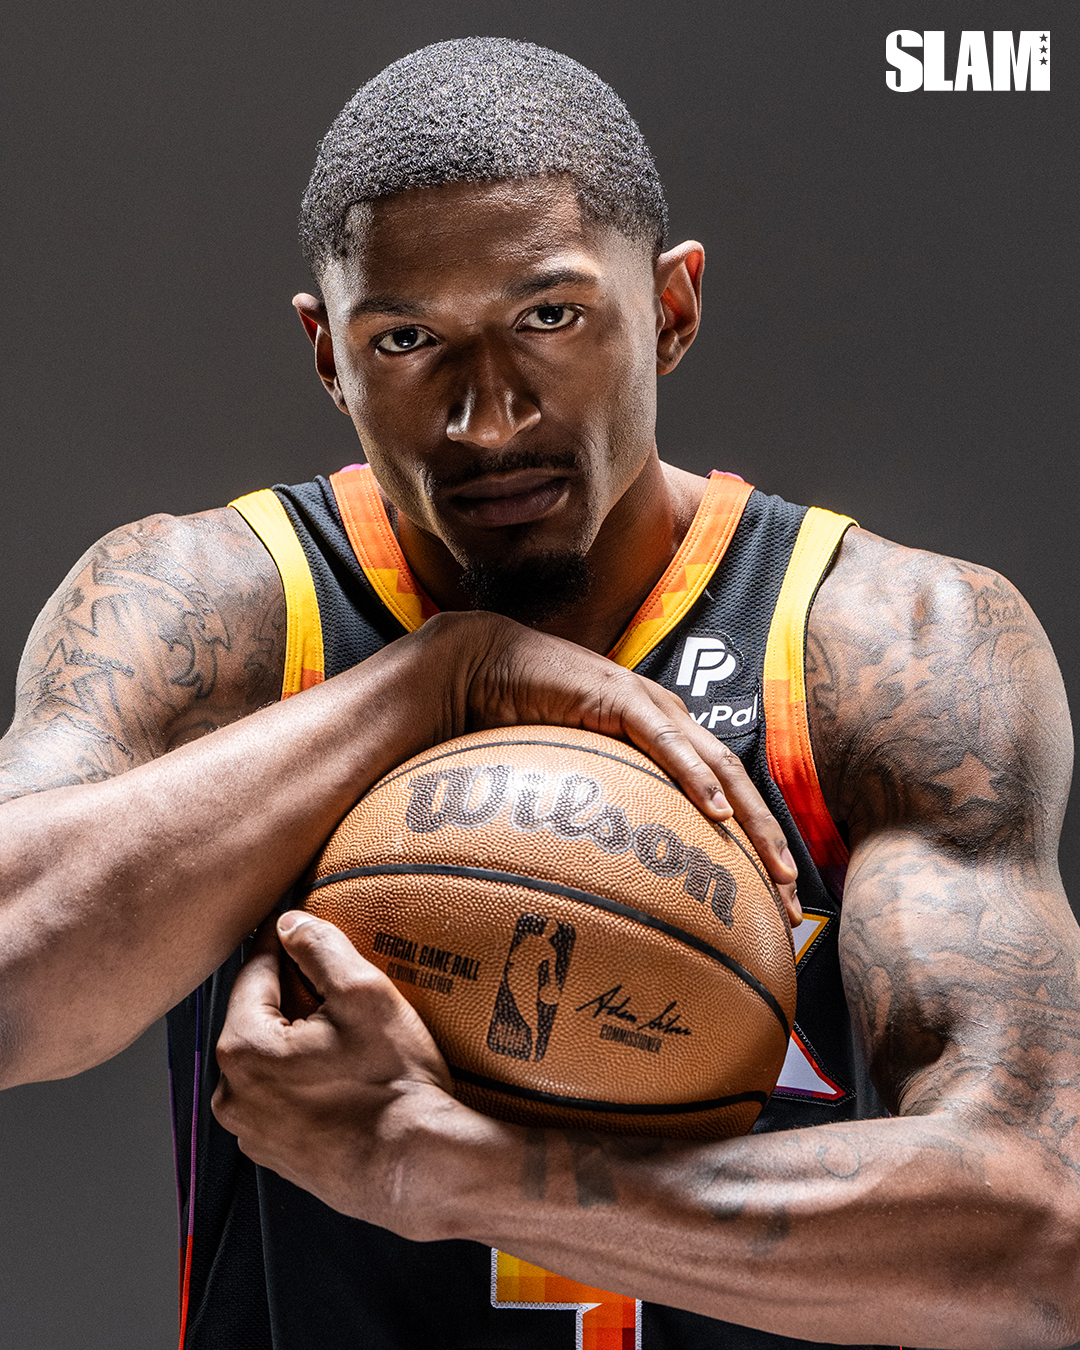 Bradley Beal’s Next Chapter: Phoenix’s New Star Opens Up About Getting Traded, His Legacy and Returning to His All-Star Form